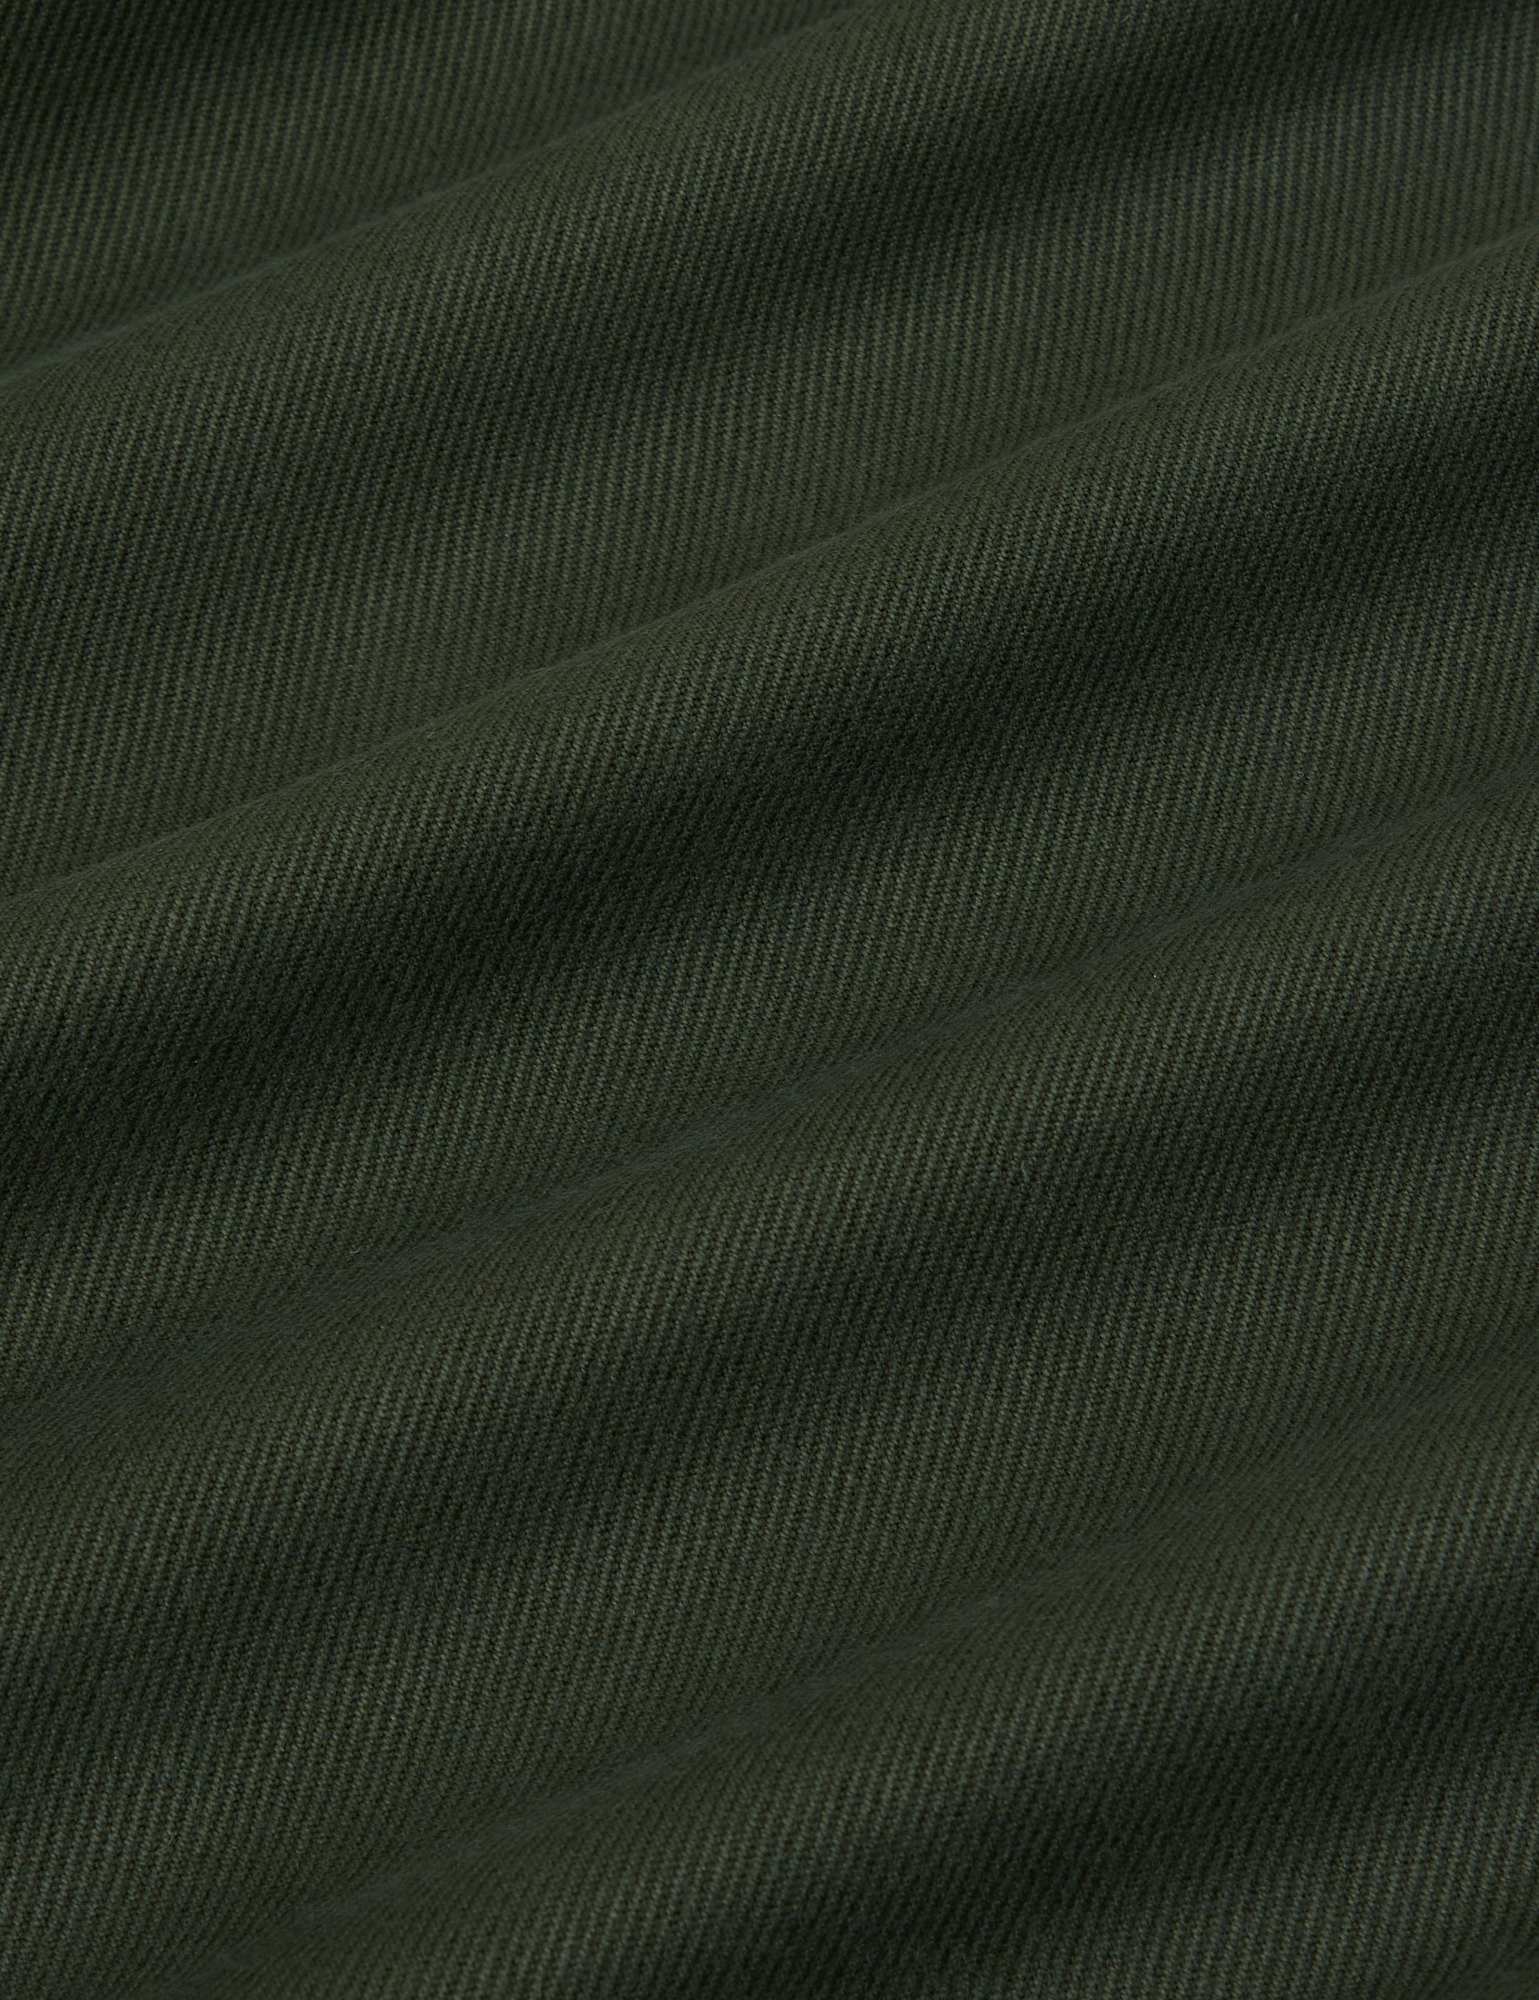 Flannel Overshirt in Swamp Green fabric close up